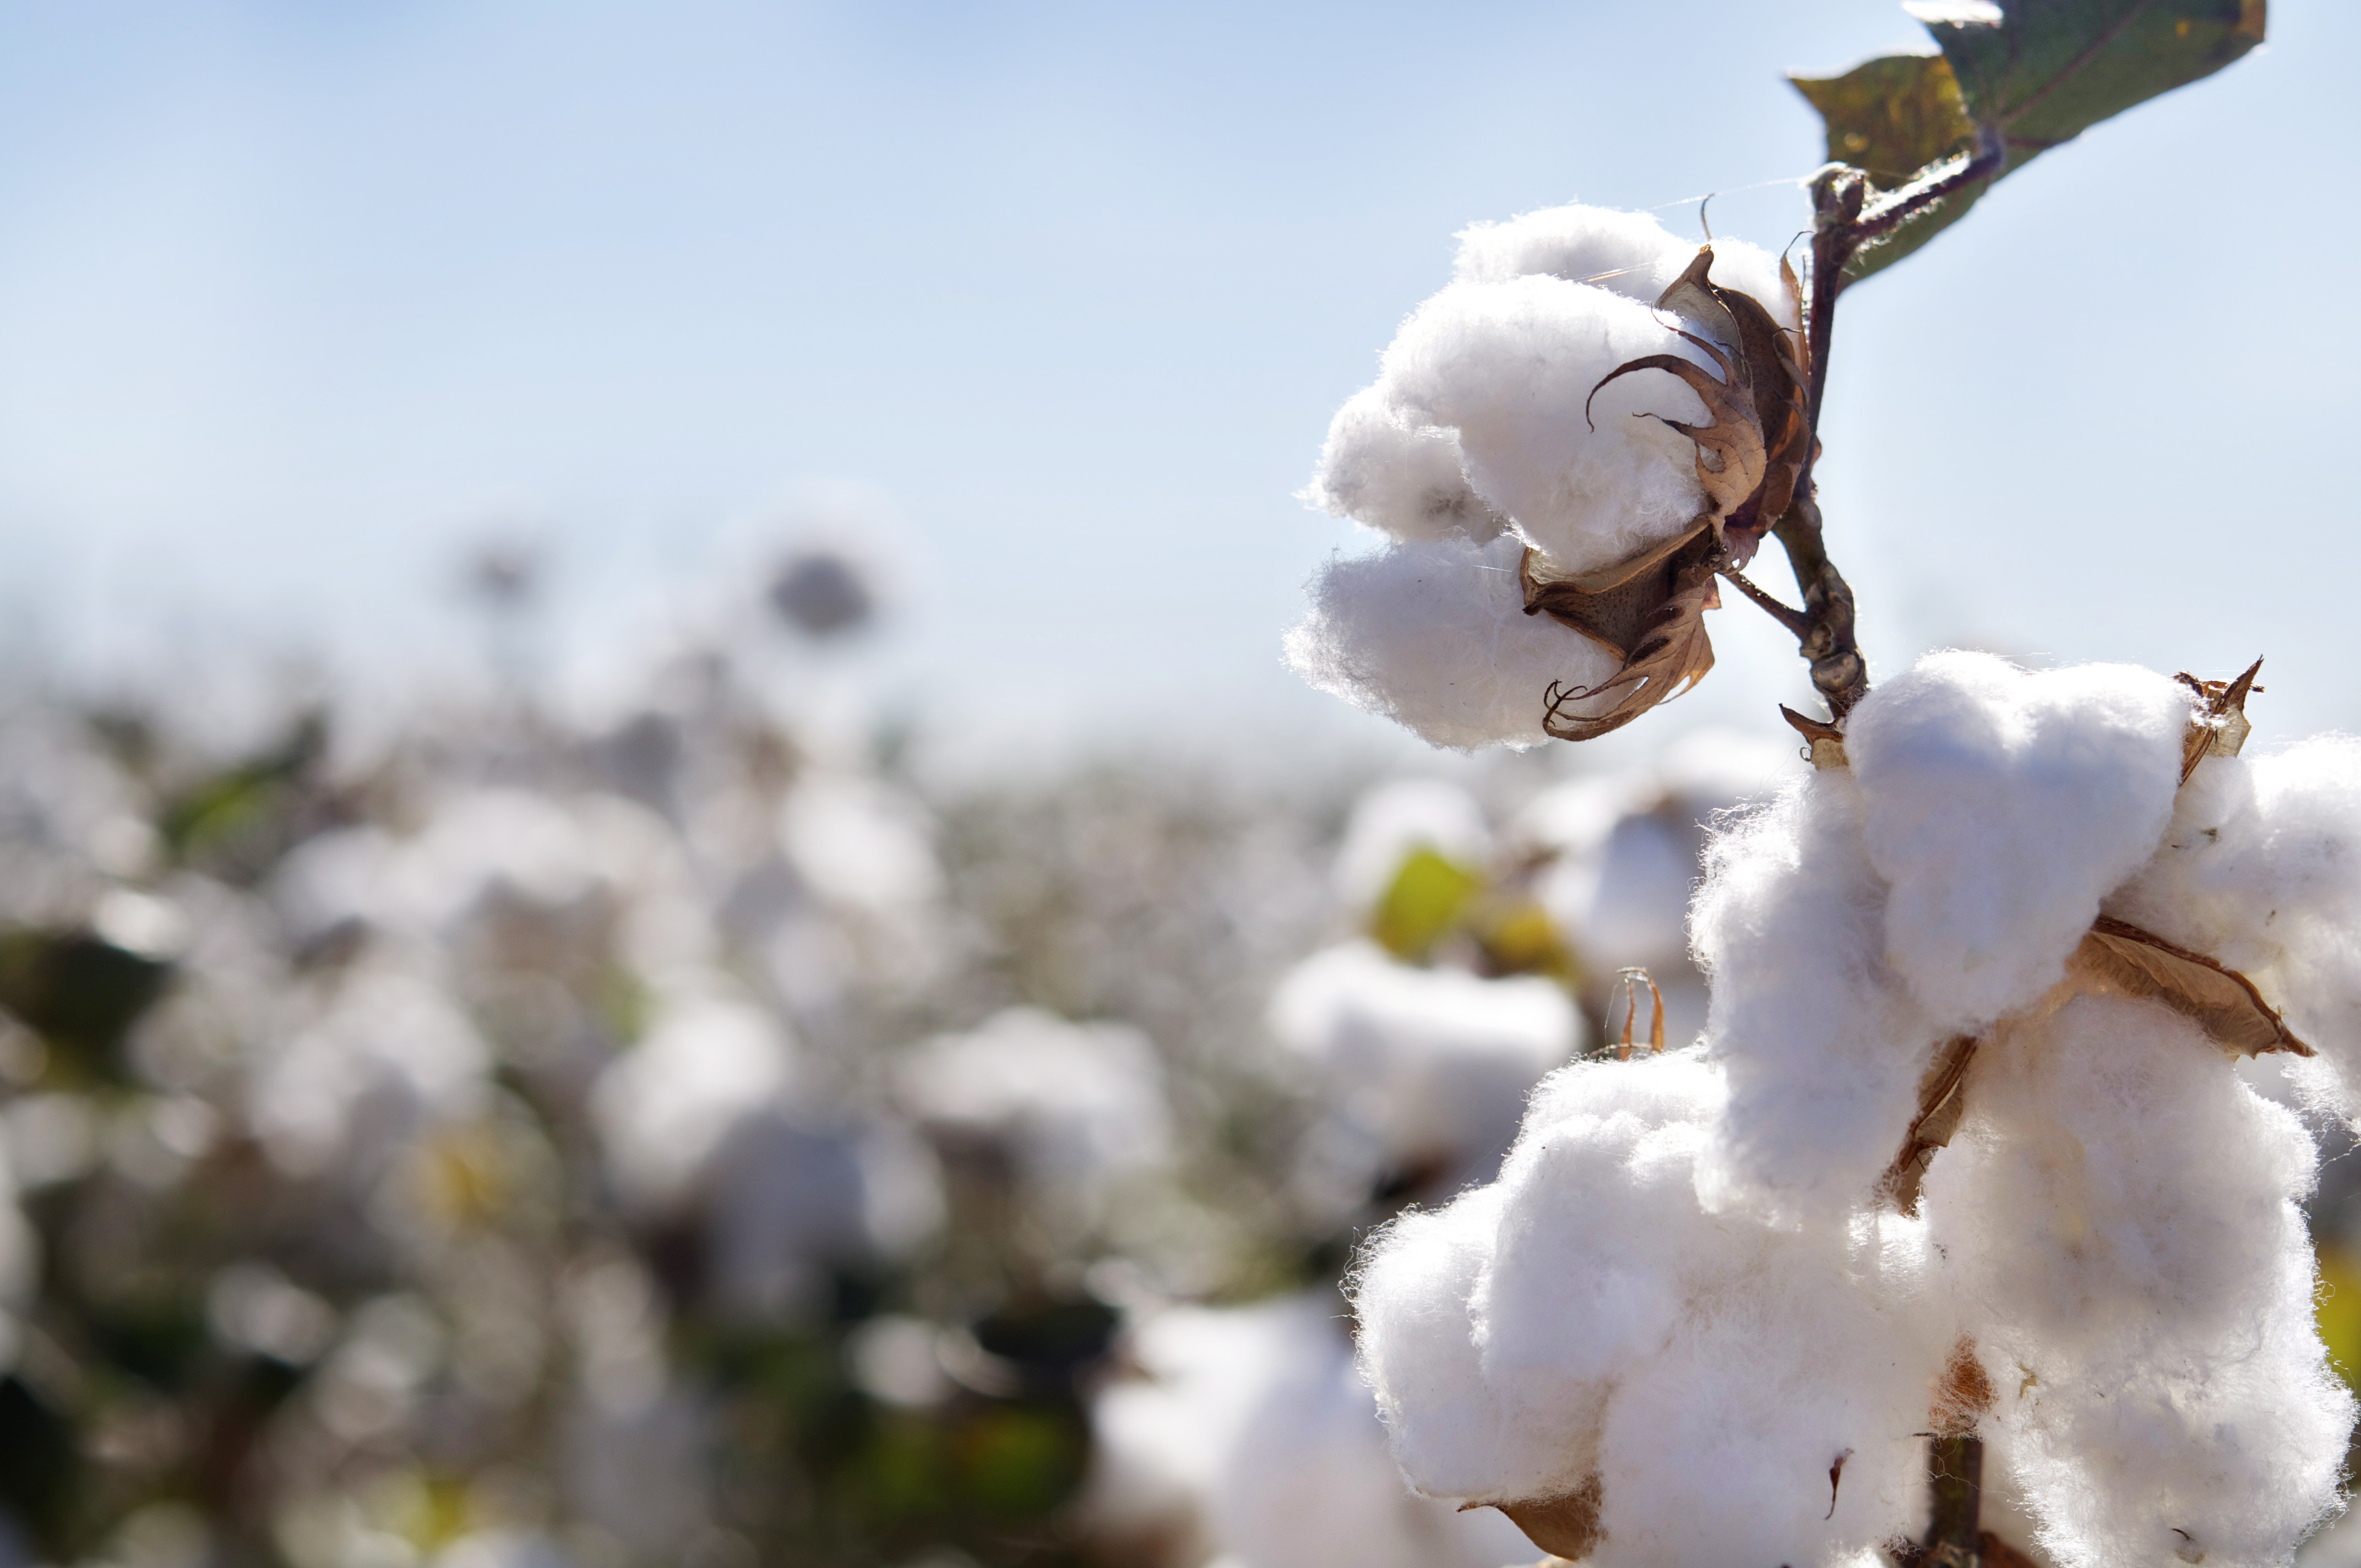 Cotton Acreage Survey Suggests Oklahoma, Texas, Kansas Growers to Lead Another Record Crop